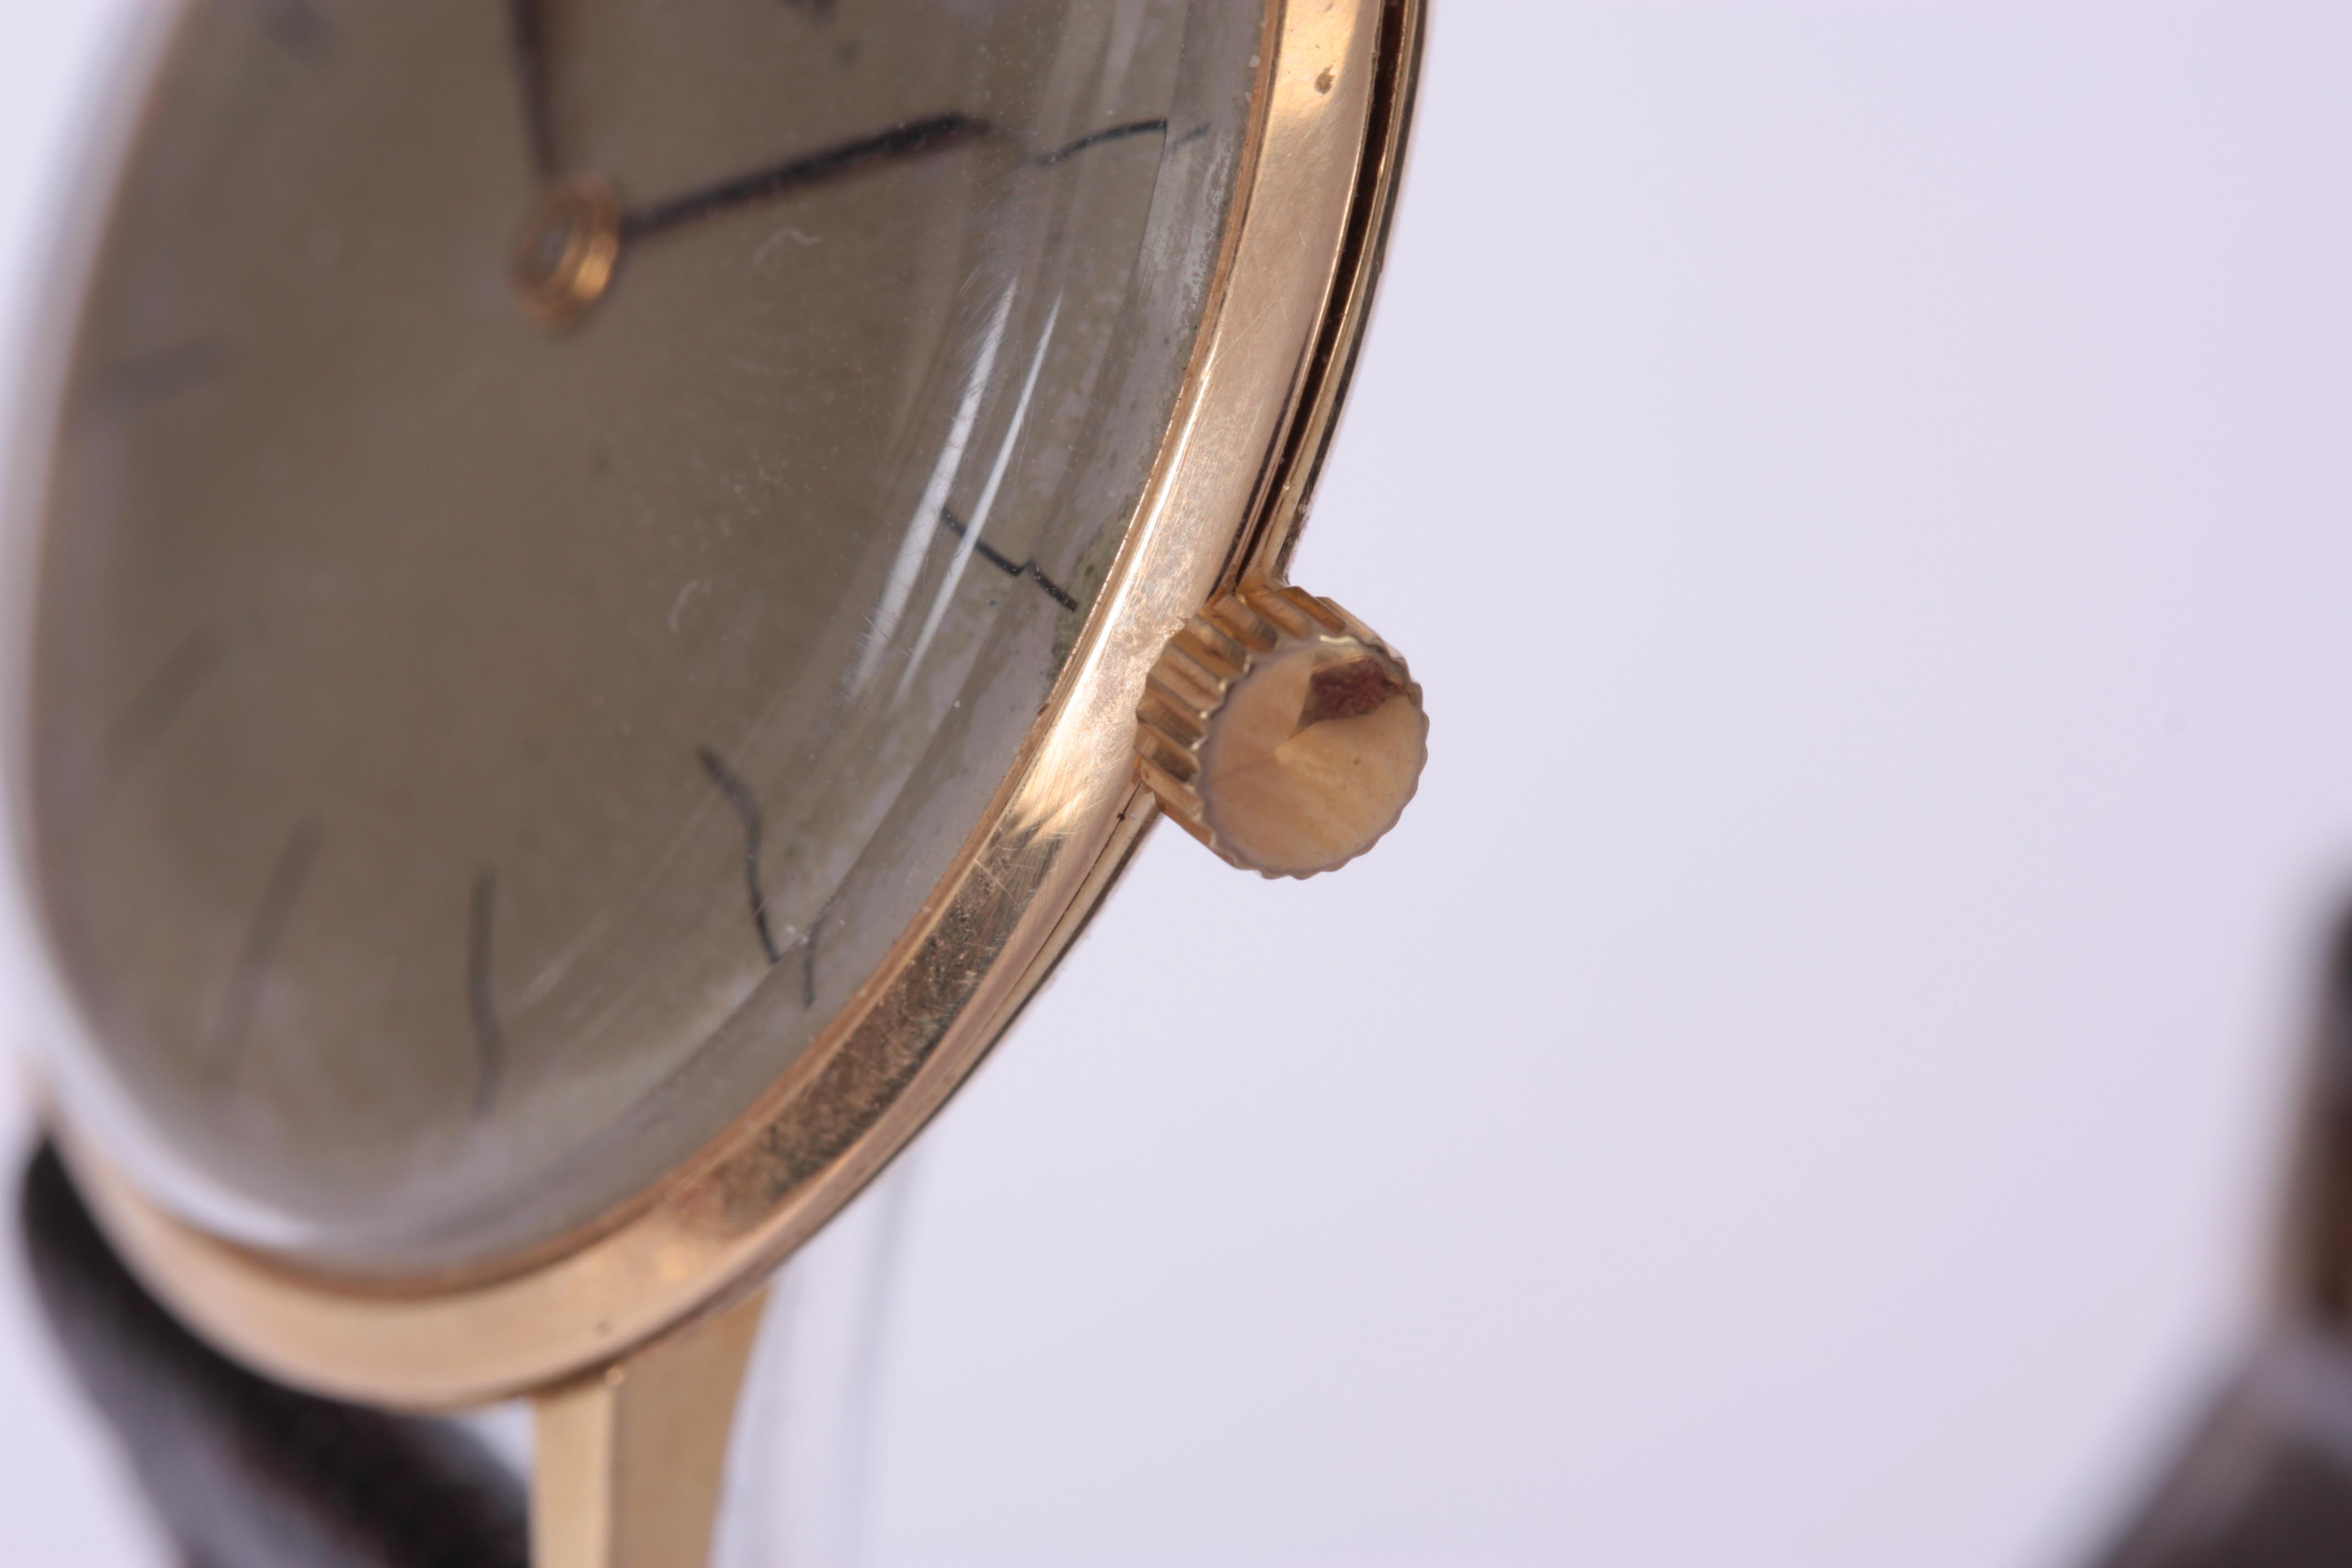 A GENTLEMAN'S 18K GOLD JUVENIA WRIST WATCH on brown leather strap, the gold case enclosing a - Image 3 of 7